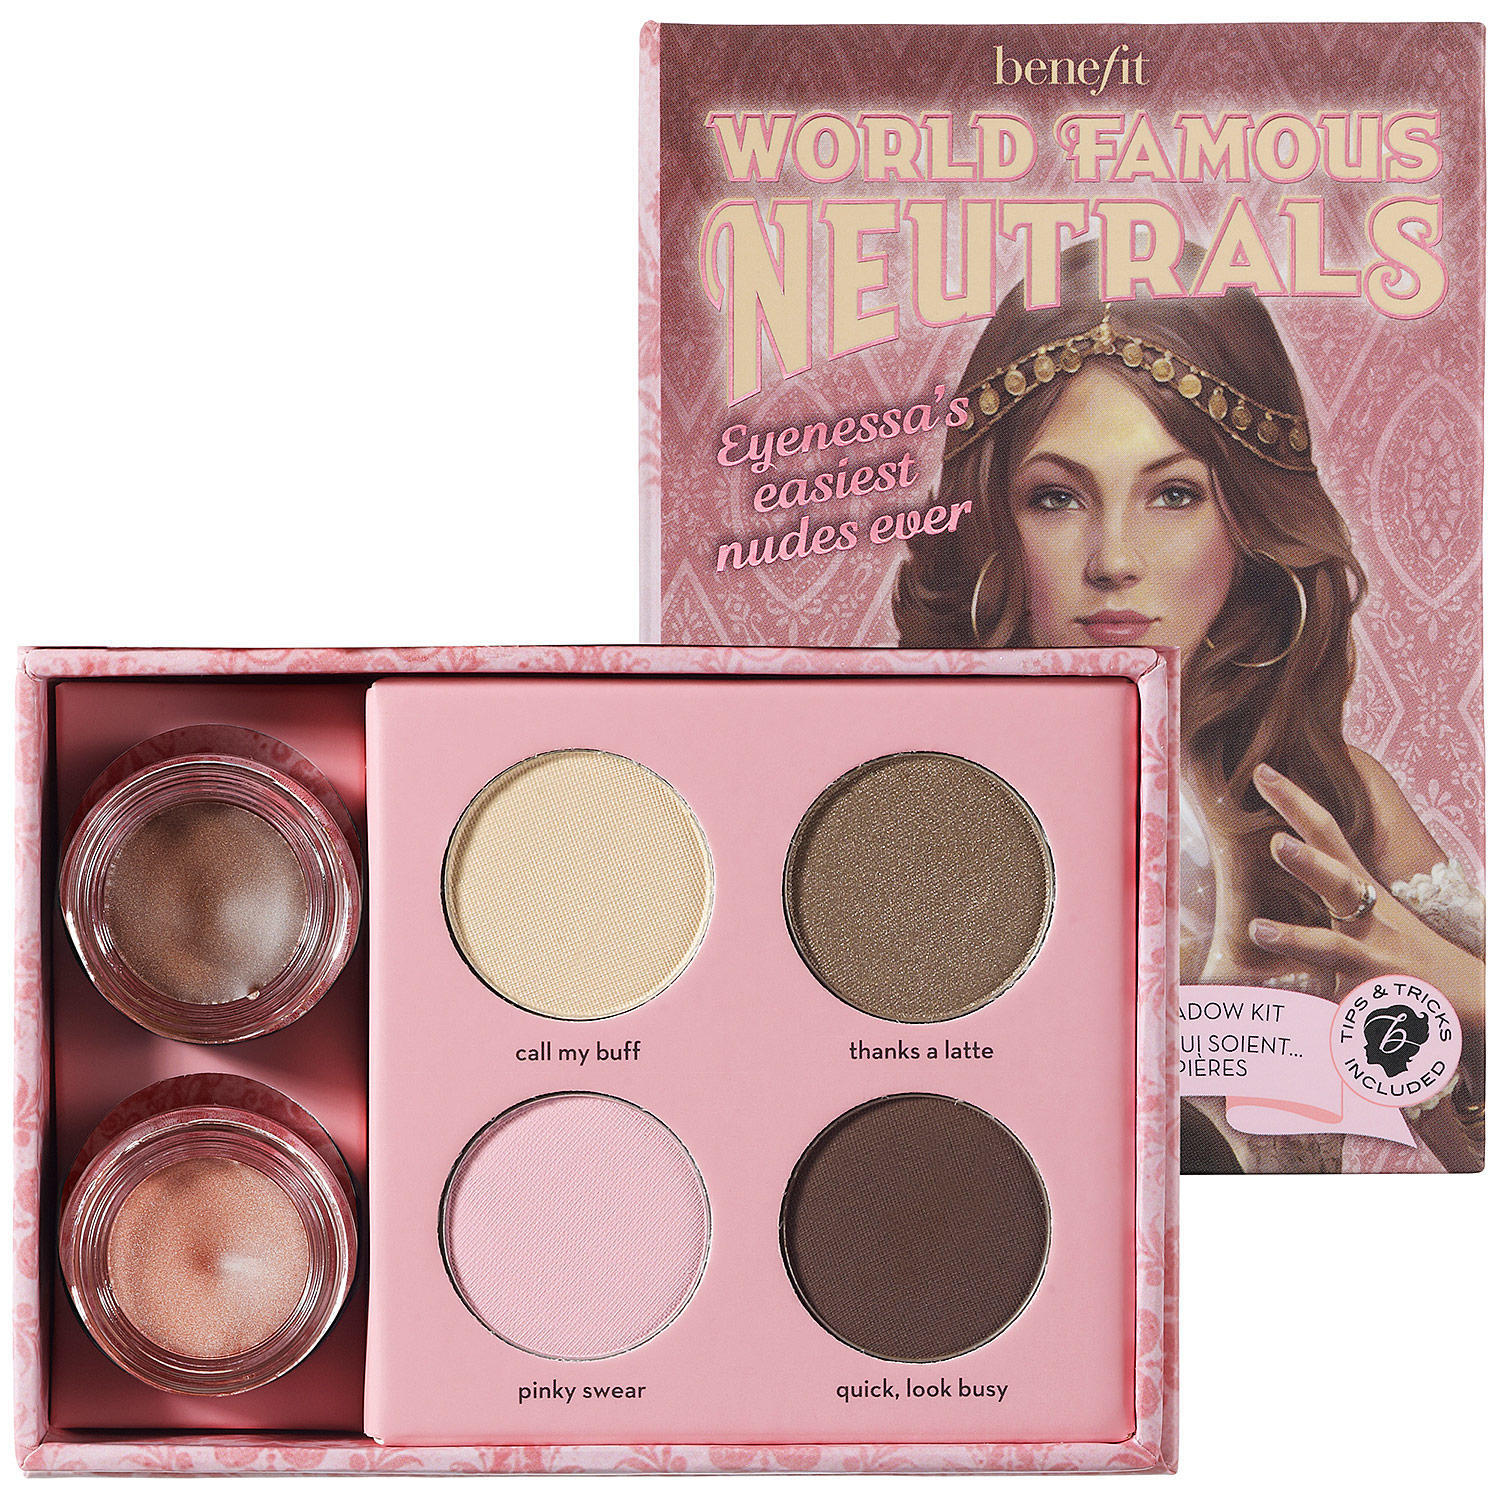 Benefit World Famous Neutrals Easiest Nudes Every Eyeshadow Kit (Without RSVP & No Pressure)